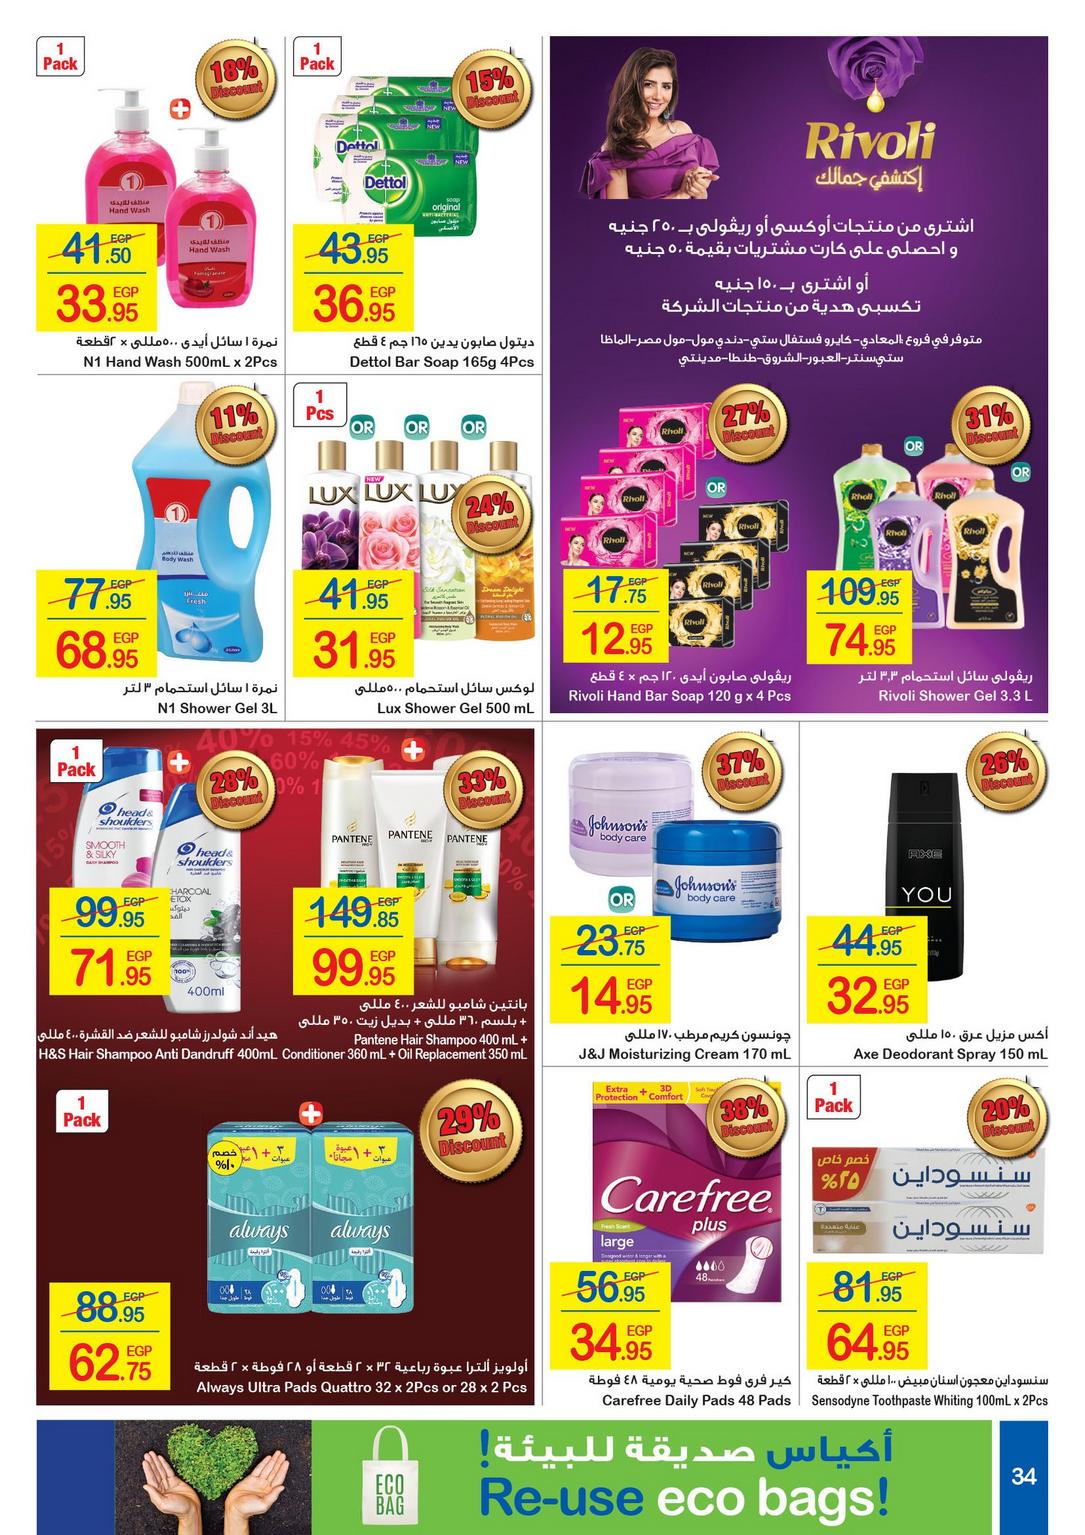 Carrefour Deals from 1/1 till 14/1 | Carrefour Egypt 35